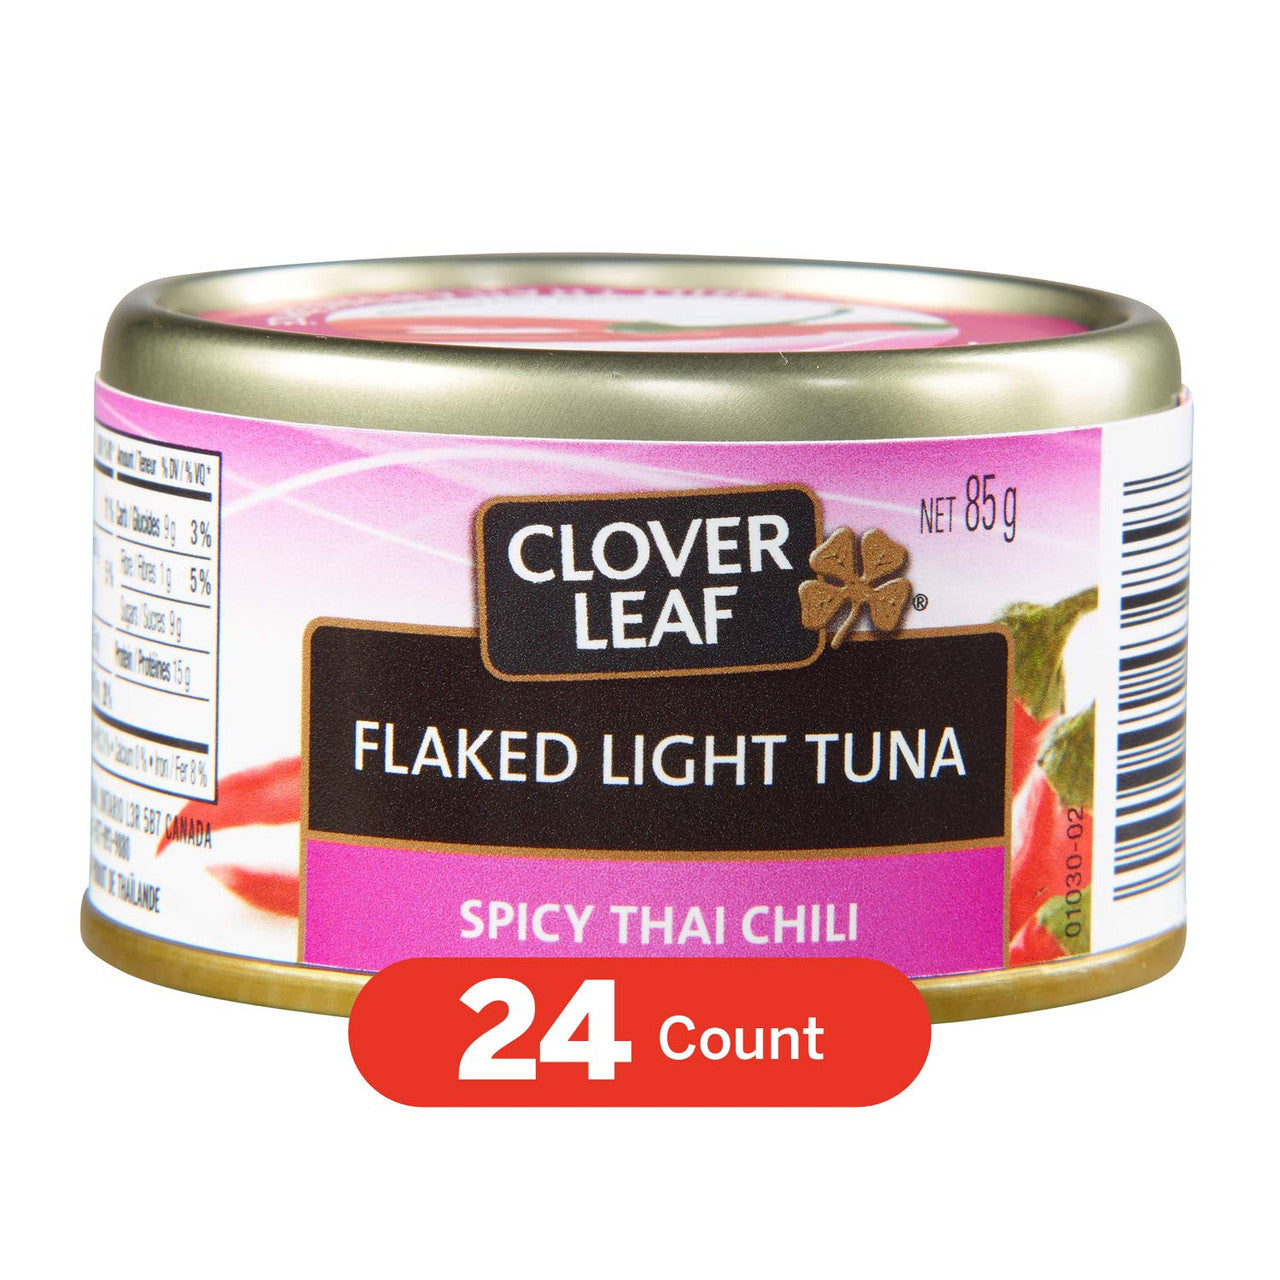 Clover Leaf Flaked Spicy Thai Chili Light Tuna, 85g/3 oz., (24 Pack) {Imported from Canada}